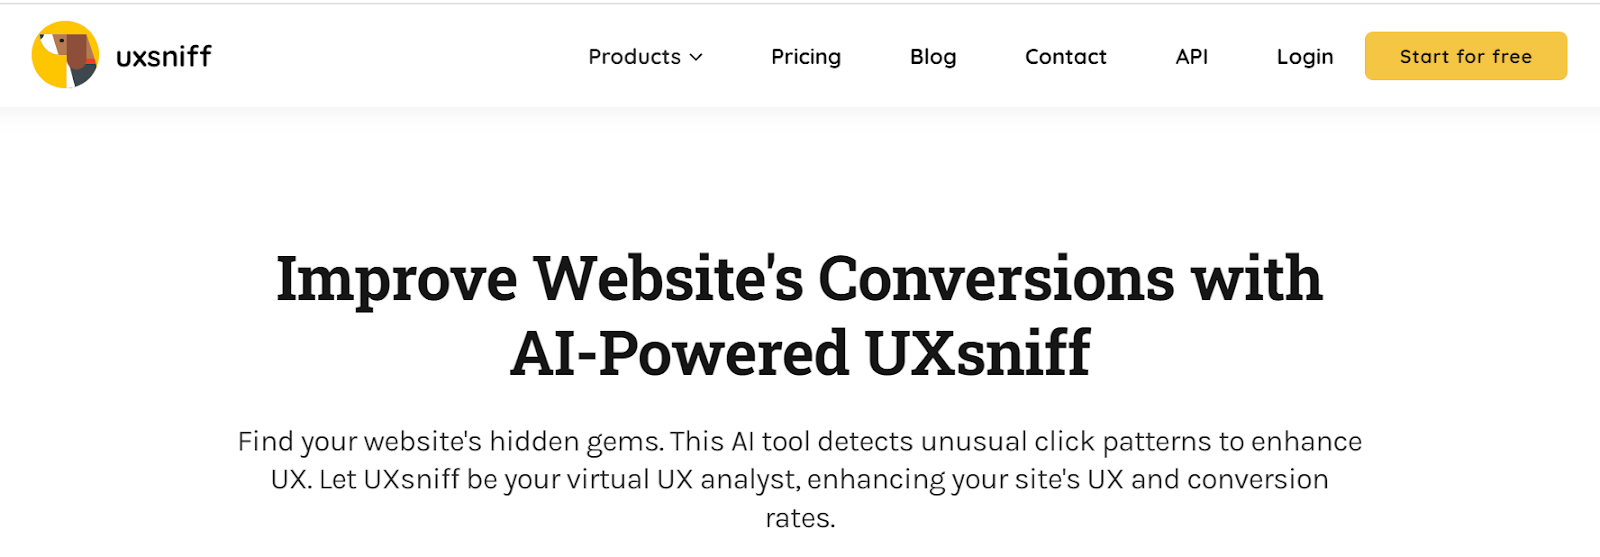 UX Sniff homepage